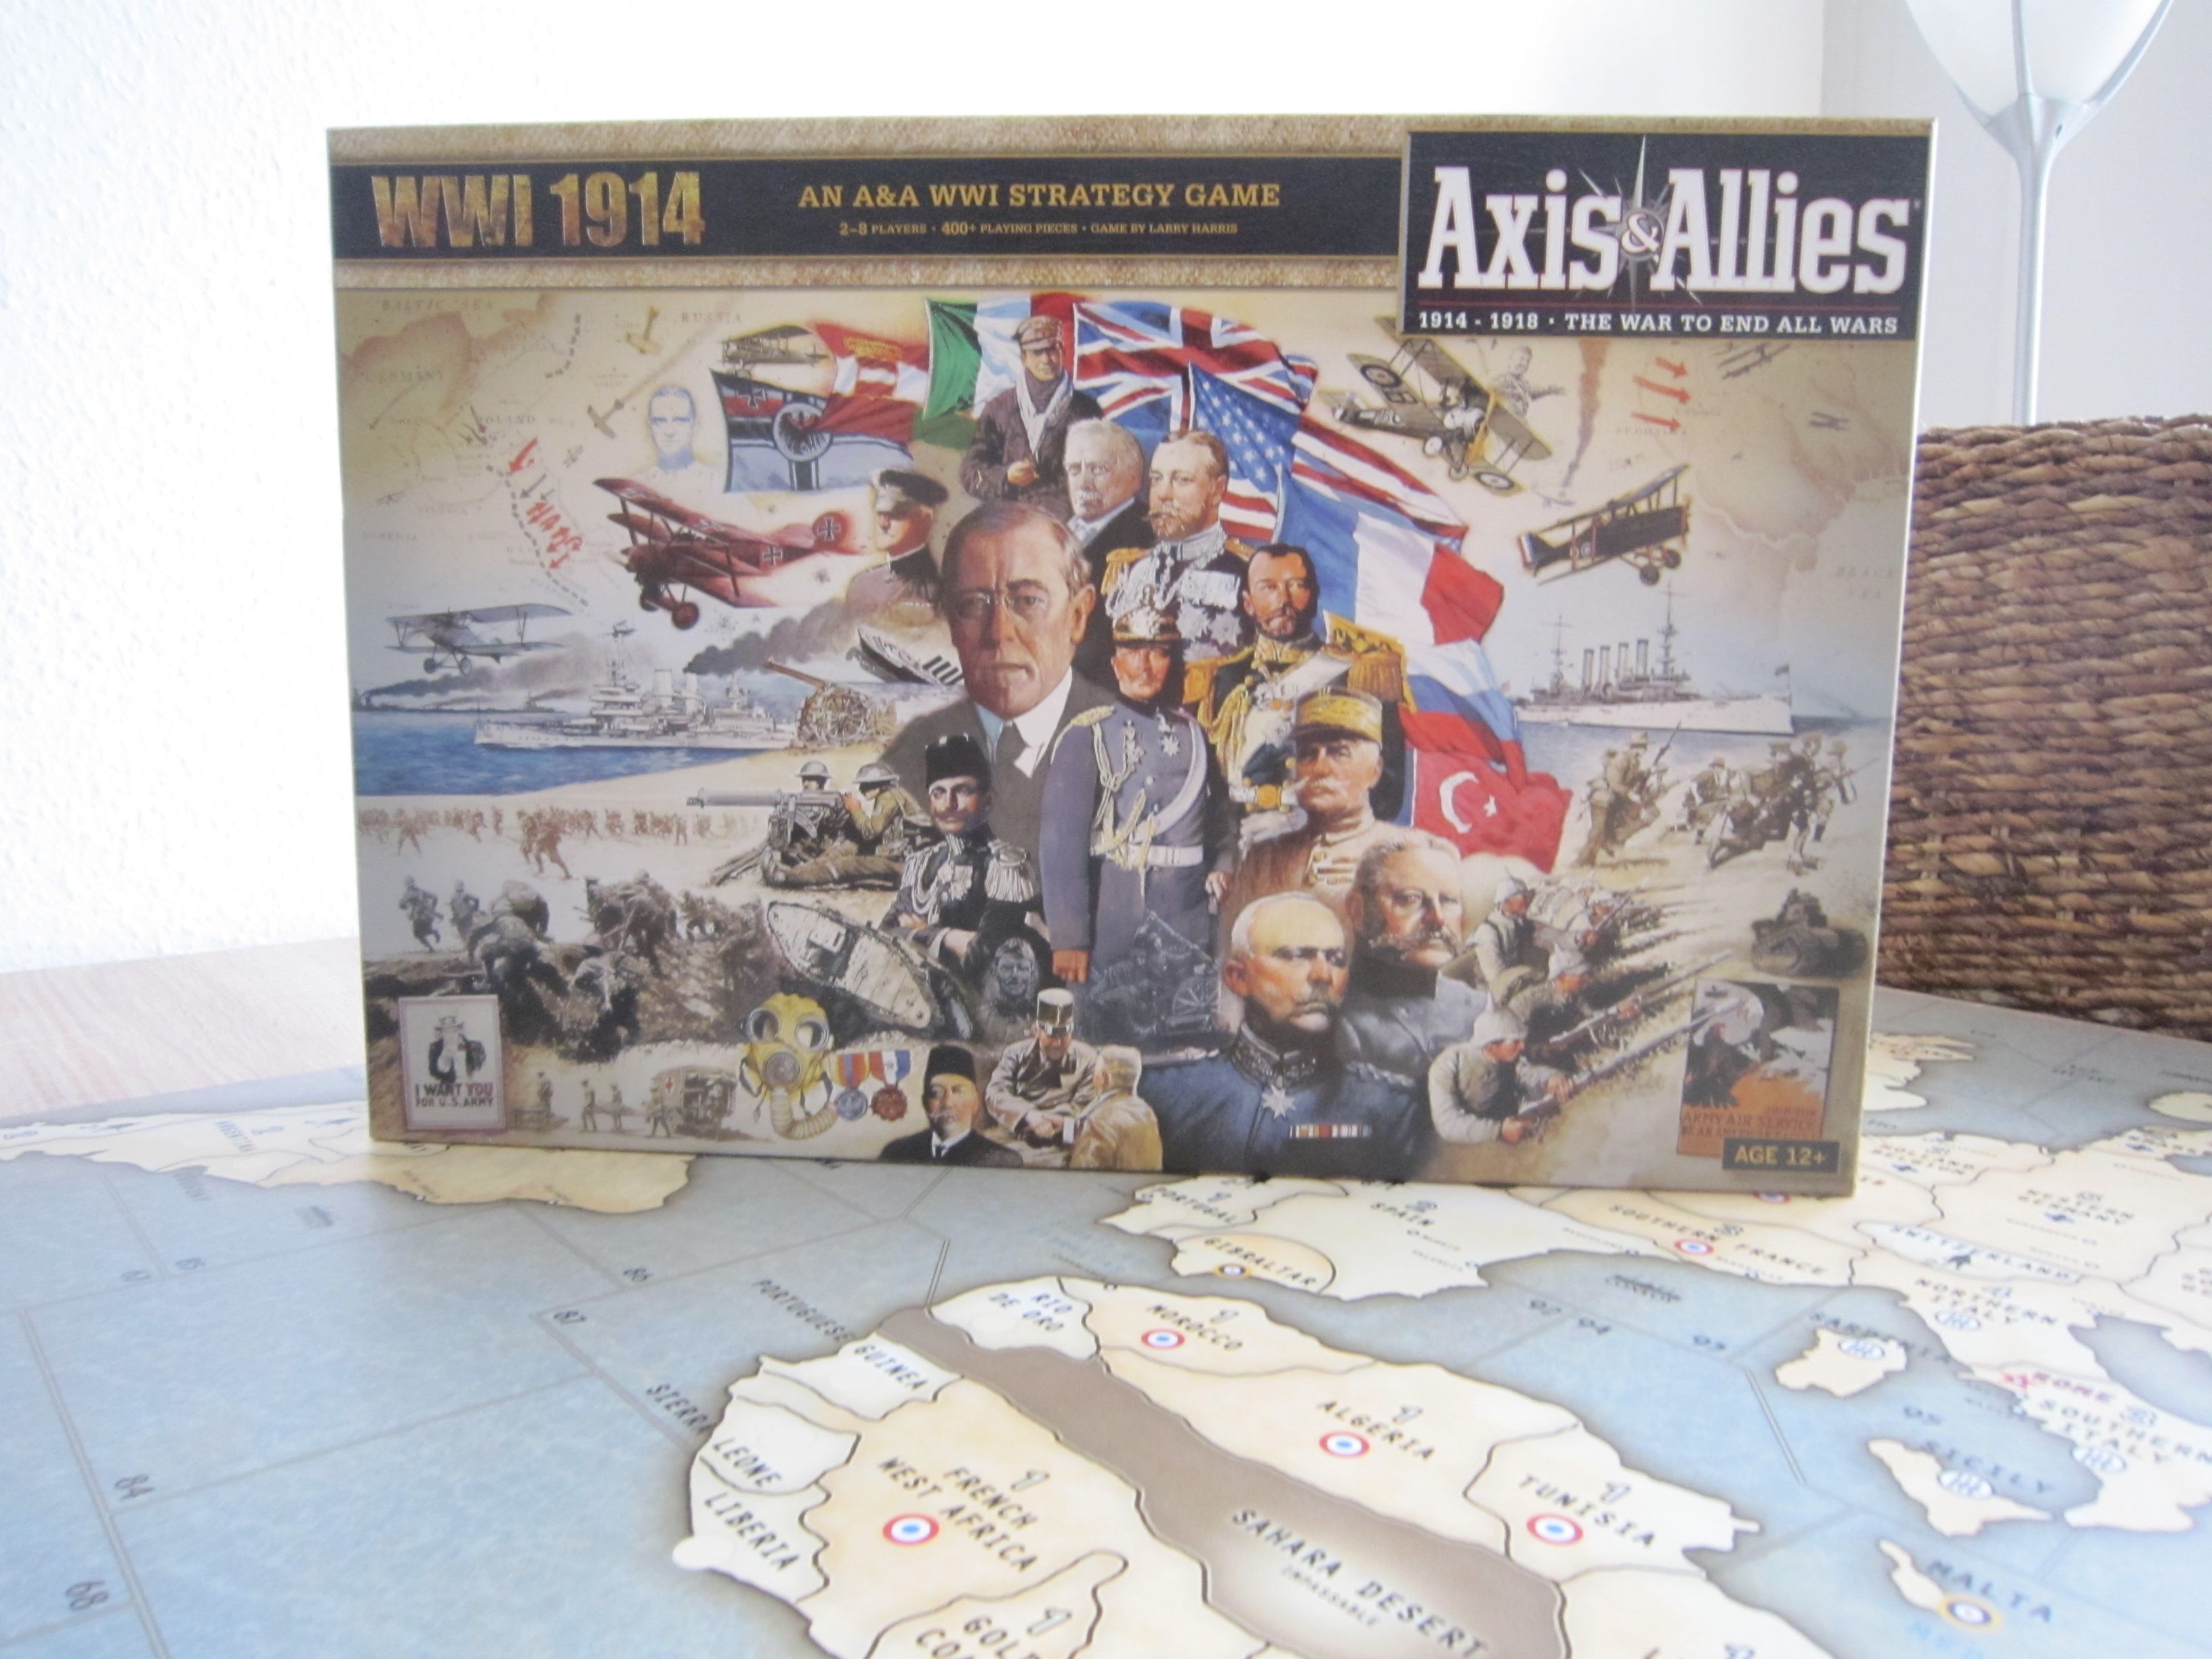 My Axis & Allies collection